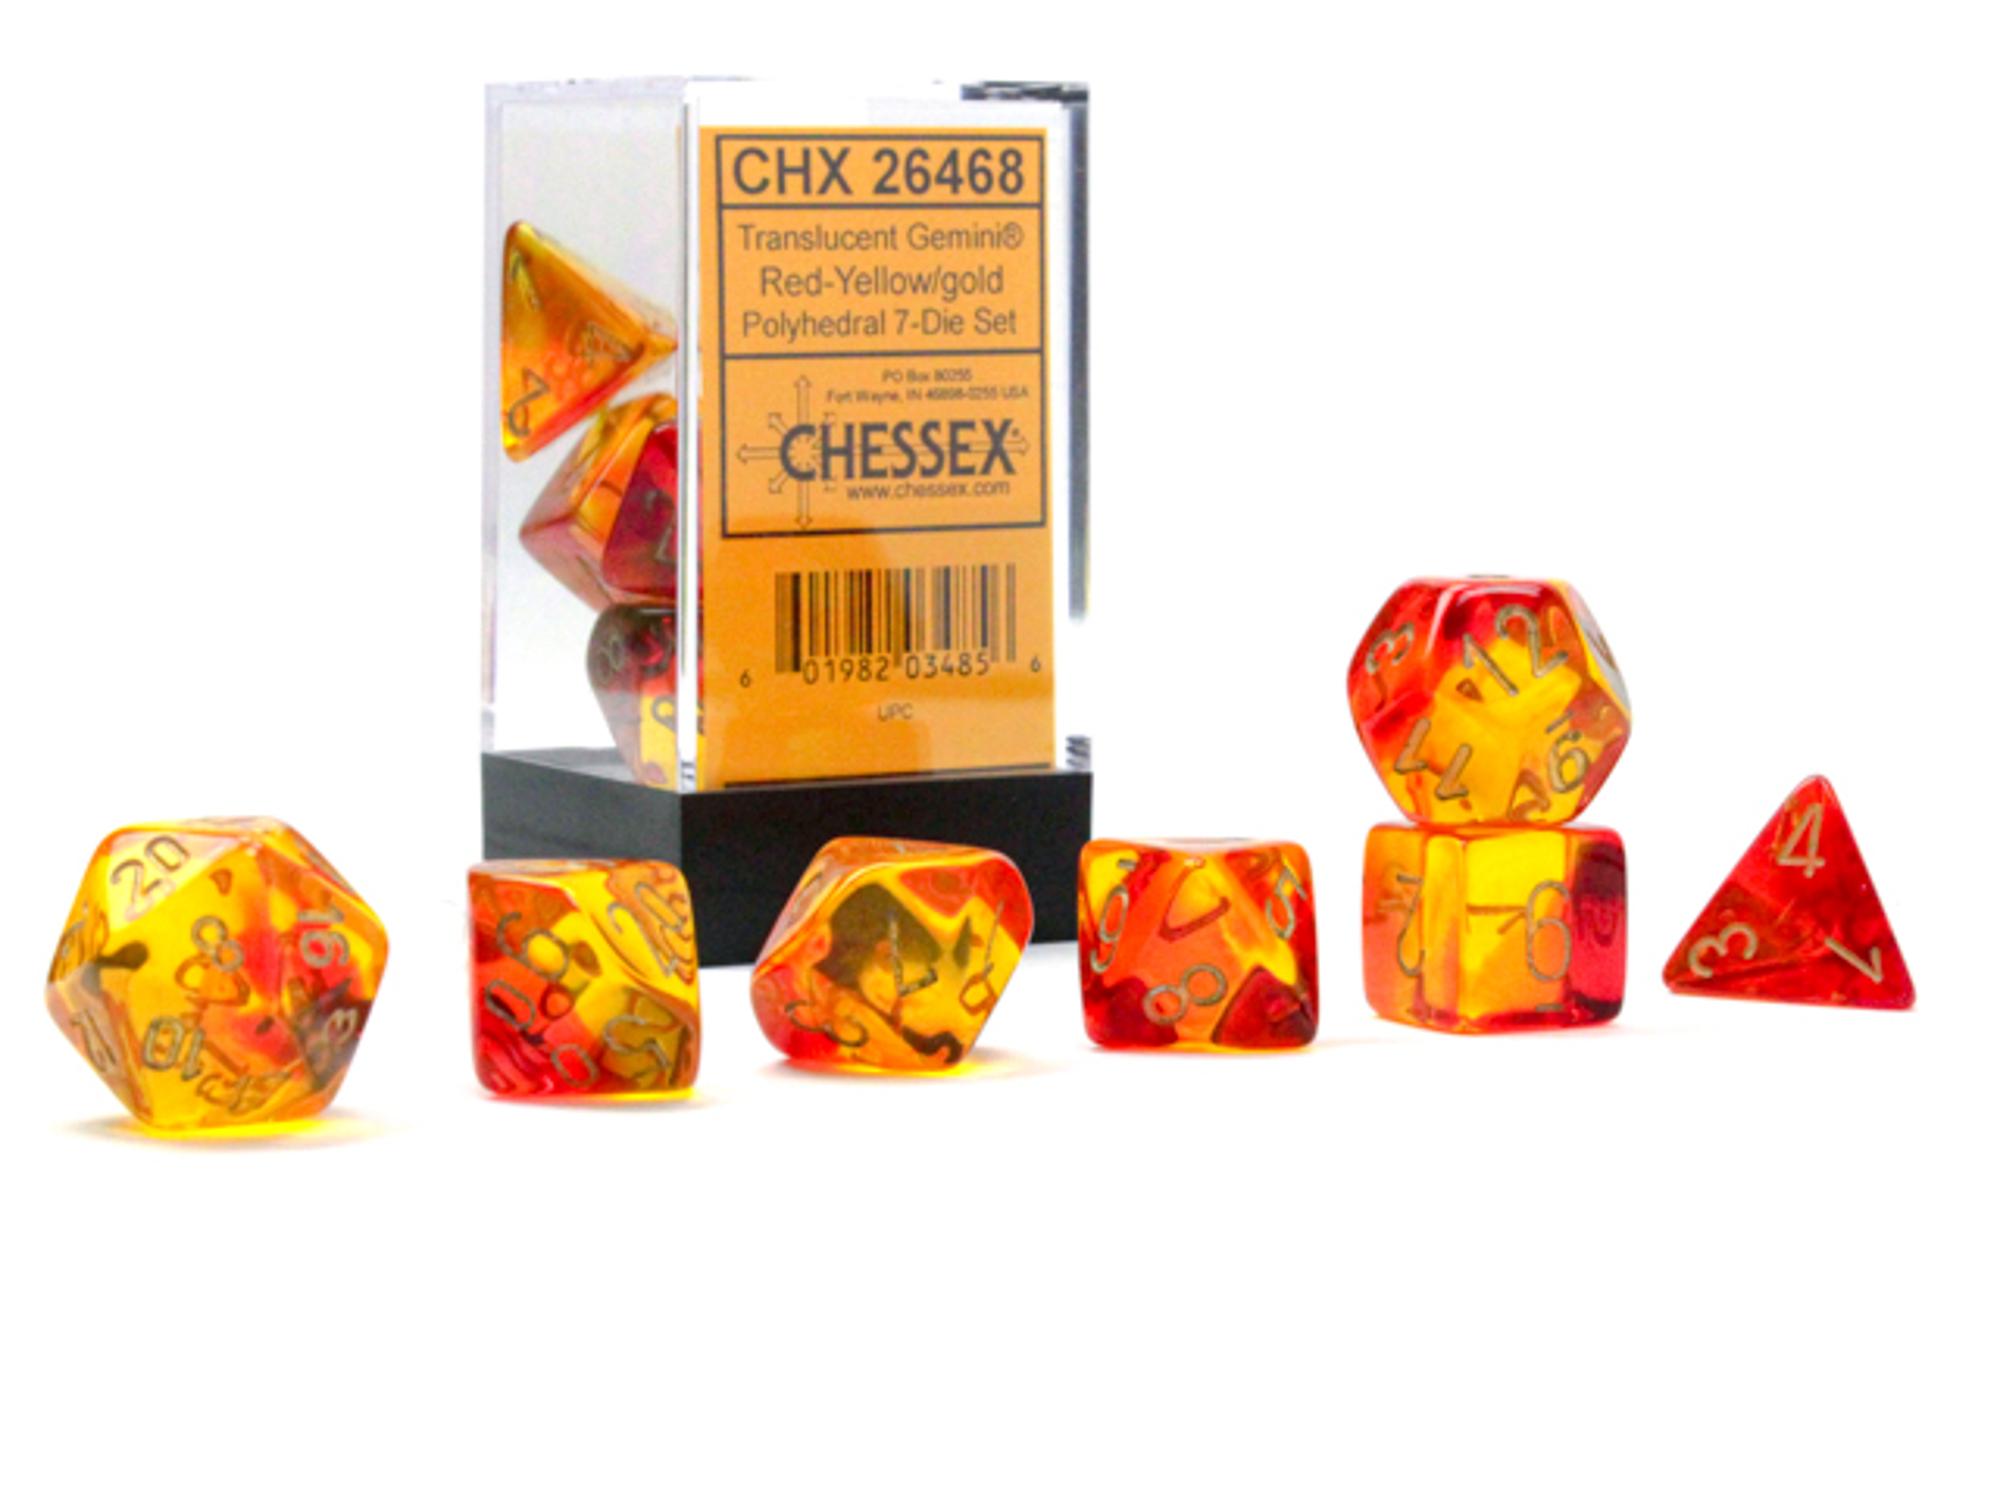 Chessex Gemini Polyhedral Translucent Red-Yellow 7 Die Set